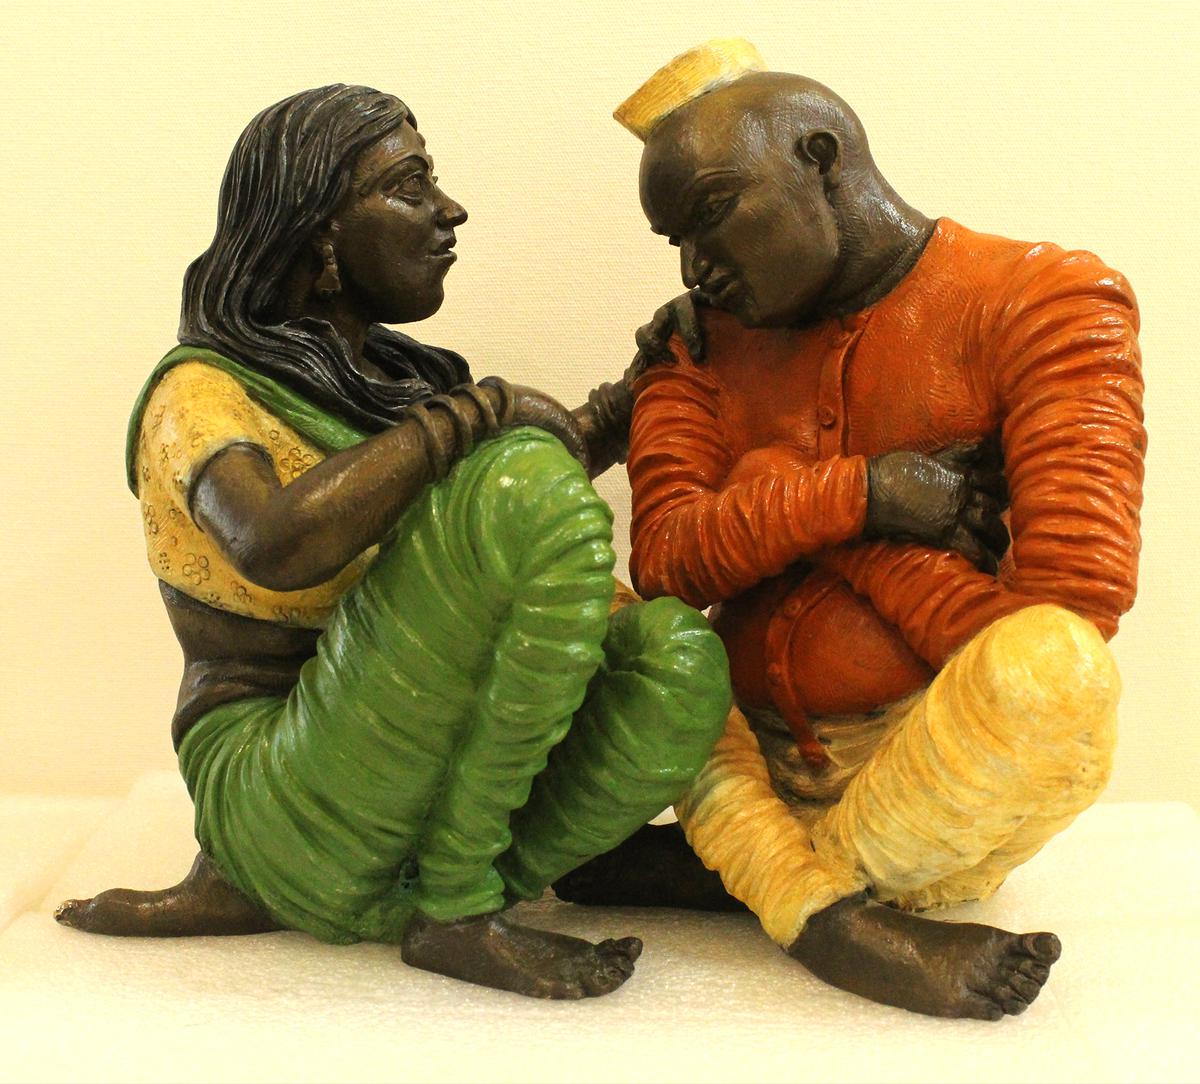 A sculpture by Jogen Chowdhary